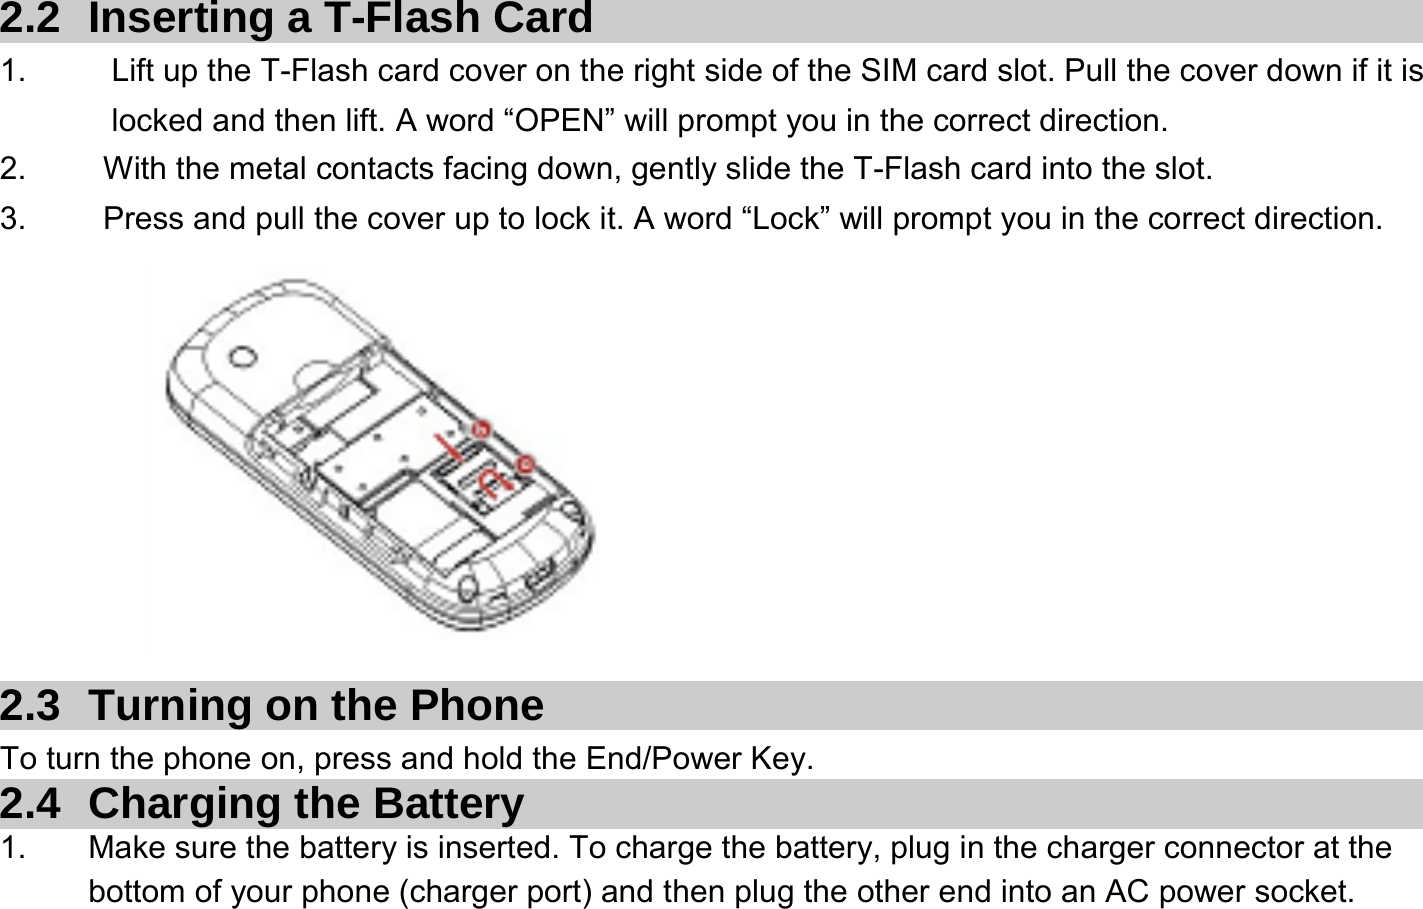  2.2  Inserting a T-Flash Card 1.    Lift up the T-Flash card cover on the right side of the SIM card slot. Pull the cover down if it is locked and then lift. A word “OPEN” will prompt you in the correct direction. 2.    With the metal contacts facing down, gently slide the T-Flash card into the slot. 3.    Press and pull the cover up to lock it. A word “Lock” will prompt you in the correct direction.          2.3  Turning on the Phone   To turn the phone on, press and hold the End/Power Key.   2.4 Charging the Battery 1.  Make sure the battery is inserted. To charge the battery, plug in the charger connector at the bottom of your phone (charger port) and then plug the other end into an AC power socket. 